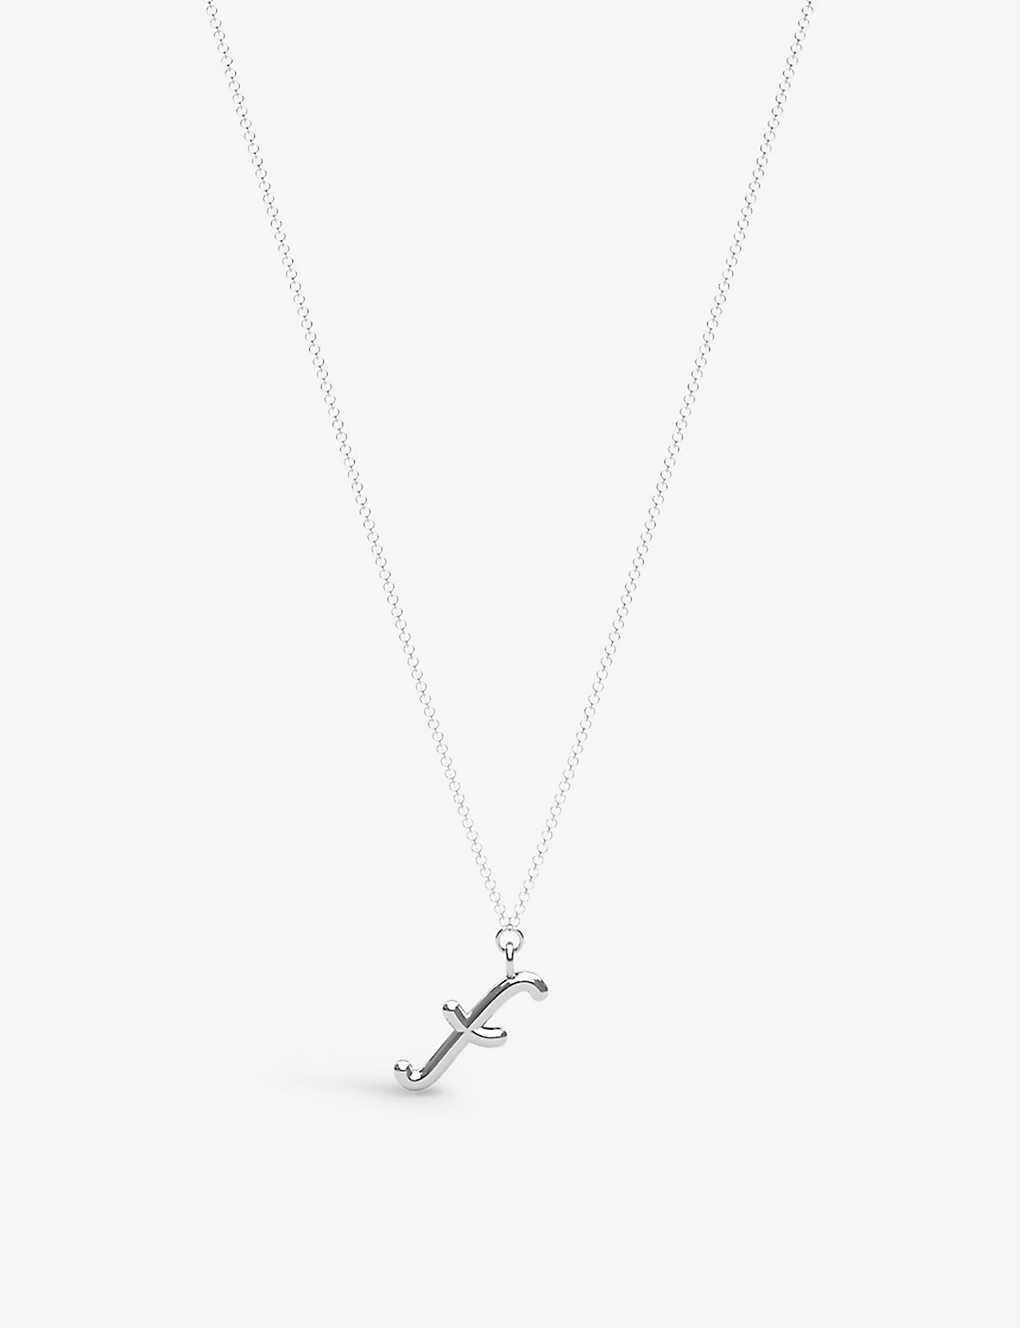 The Alkemistry Womens 18ct White Gold Love Letter F Initial 18ct White-gold Pendant Necklace